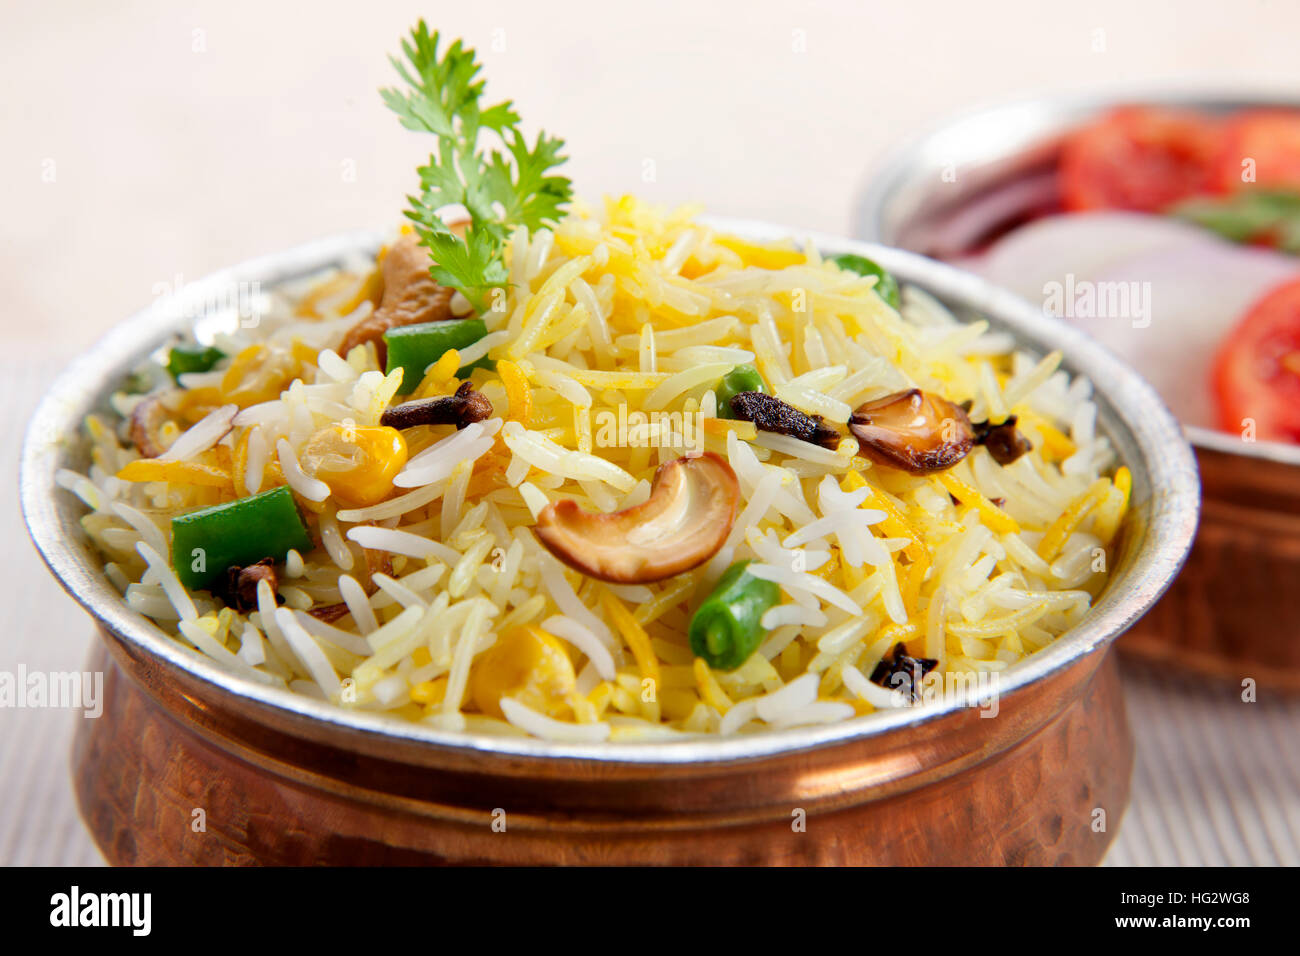 Vegetable Pulao, Indian Food Stock Photo